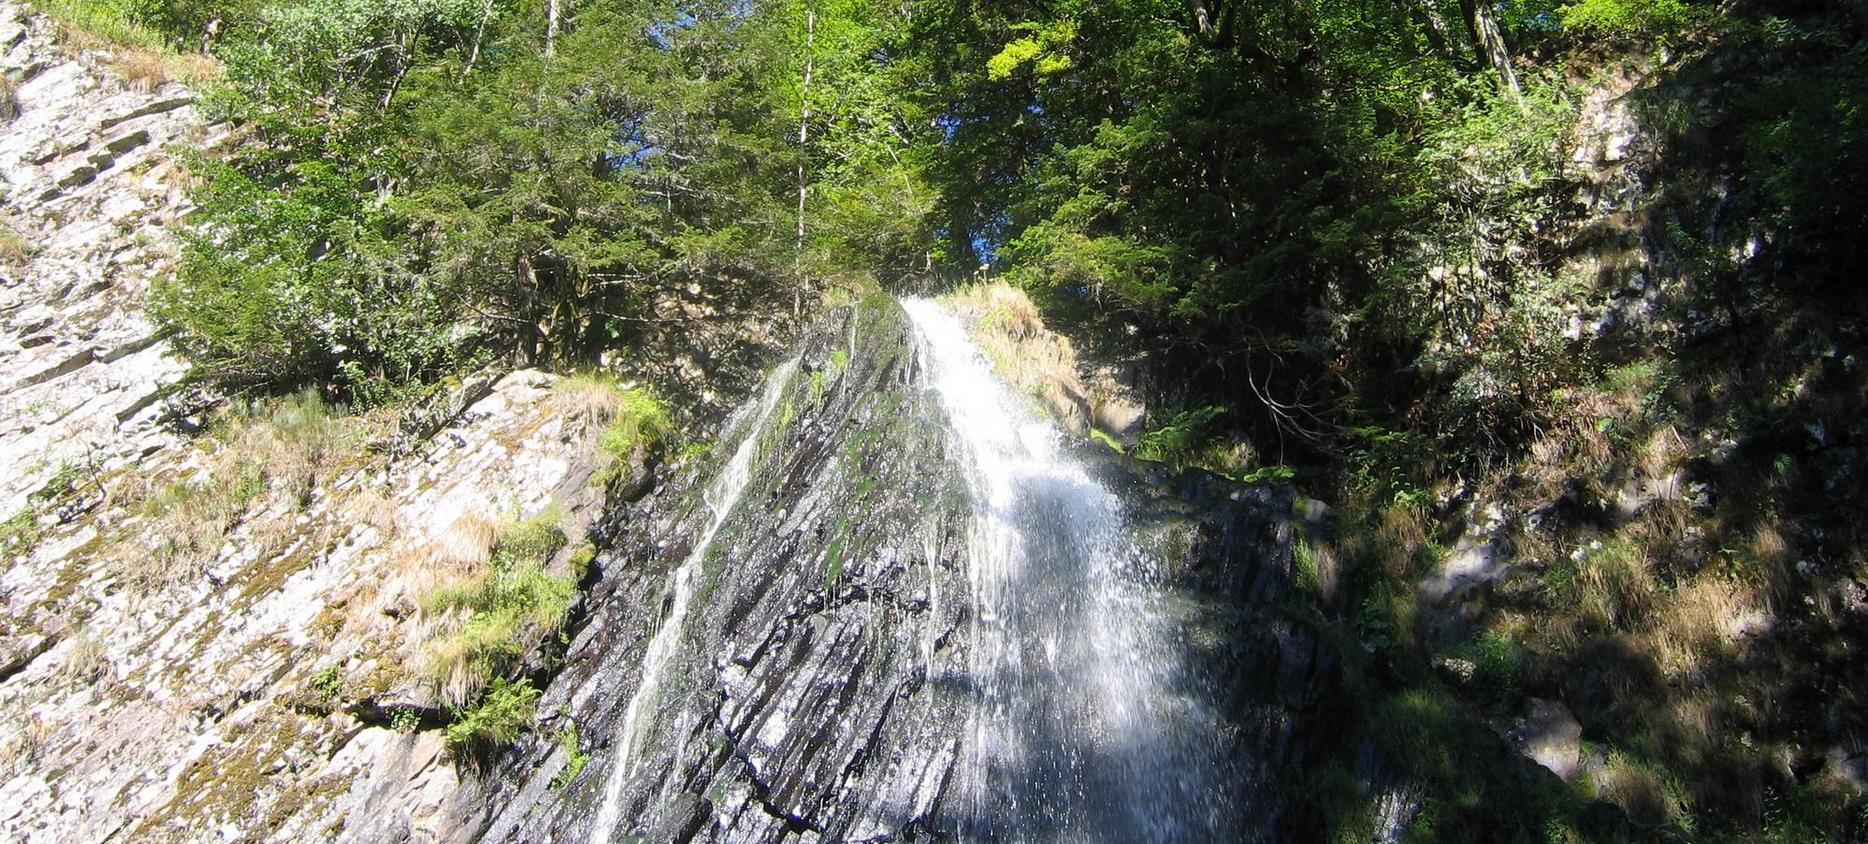 Super Besse - Waterfall at Mont Dore